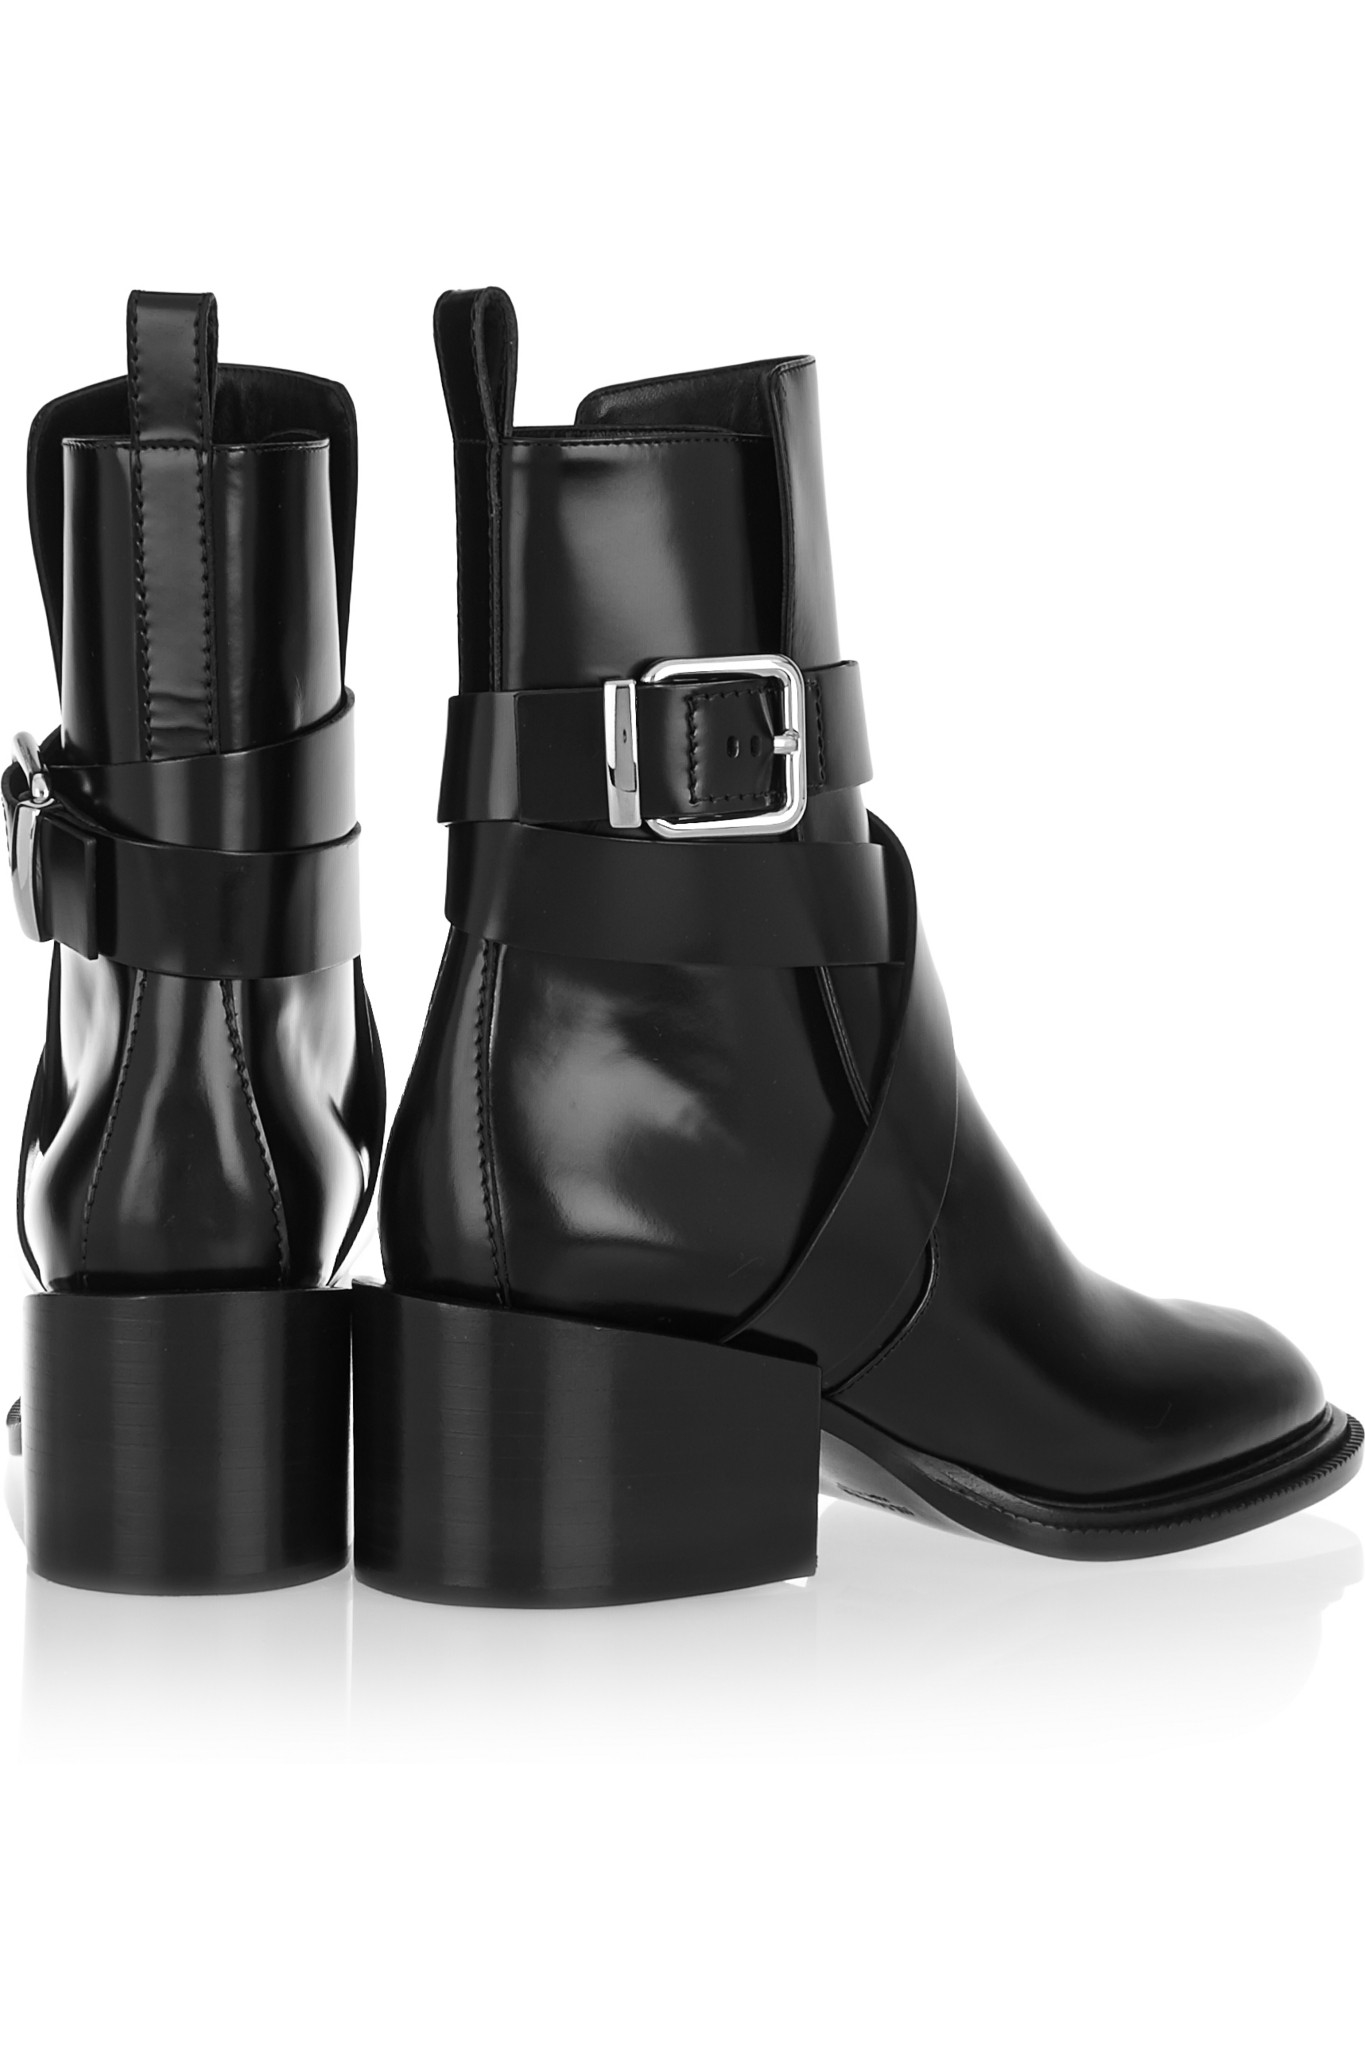 Lyst - Jil Sander Buckled Glossed-leather Ankle Boots in Black